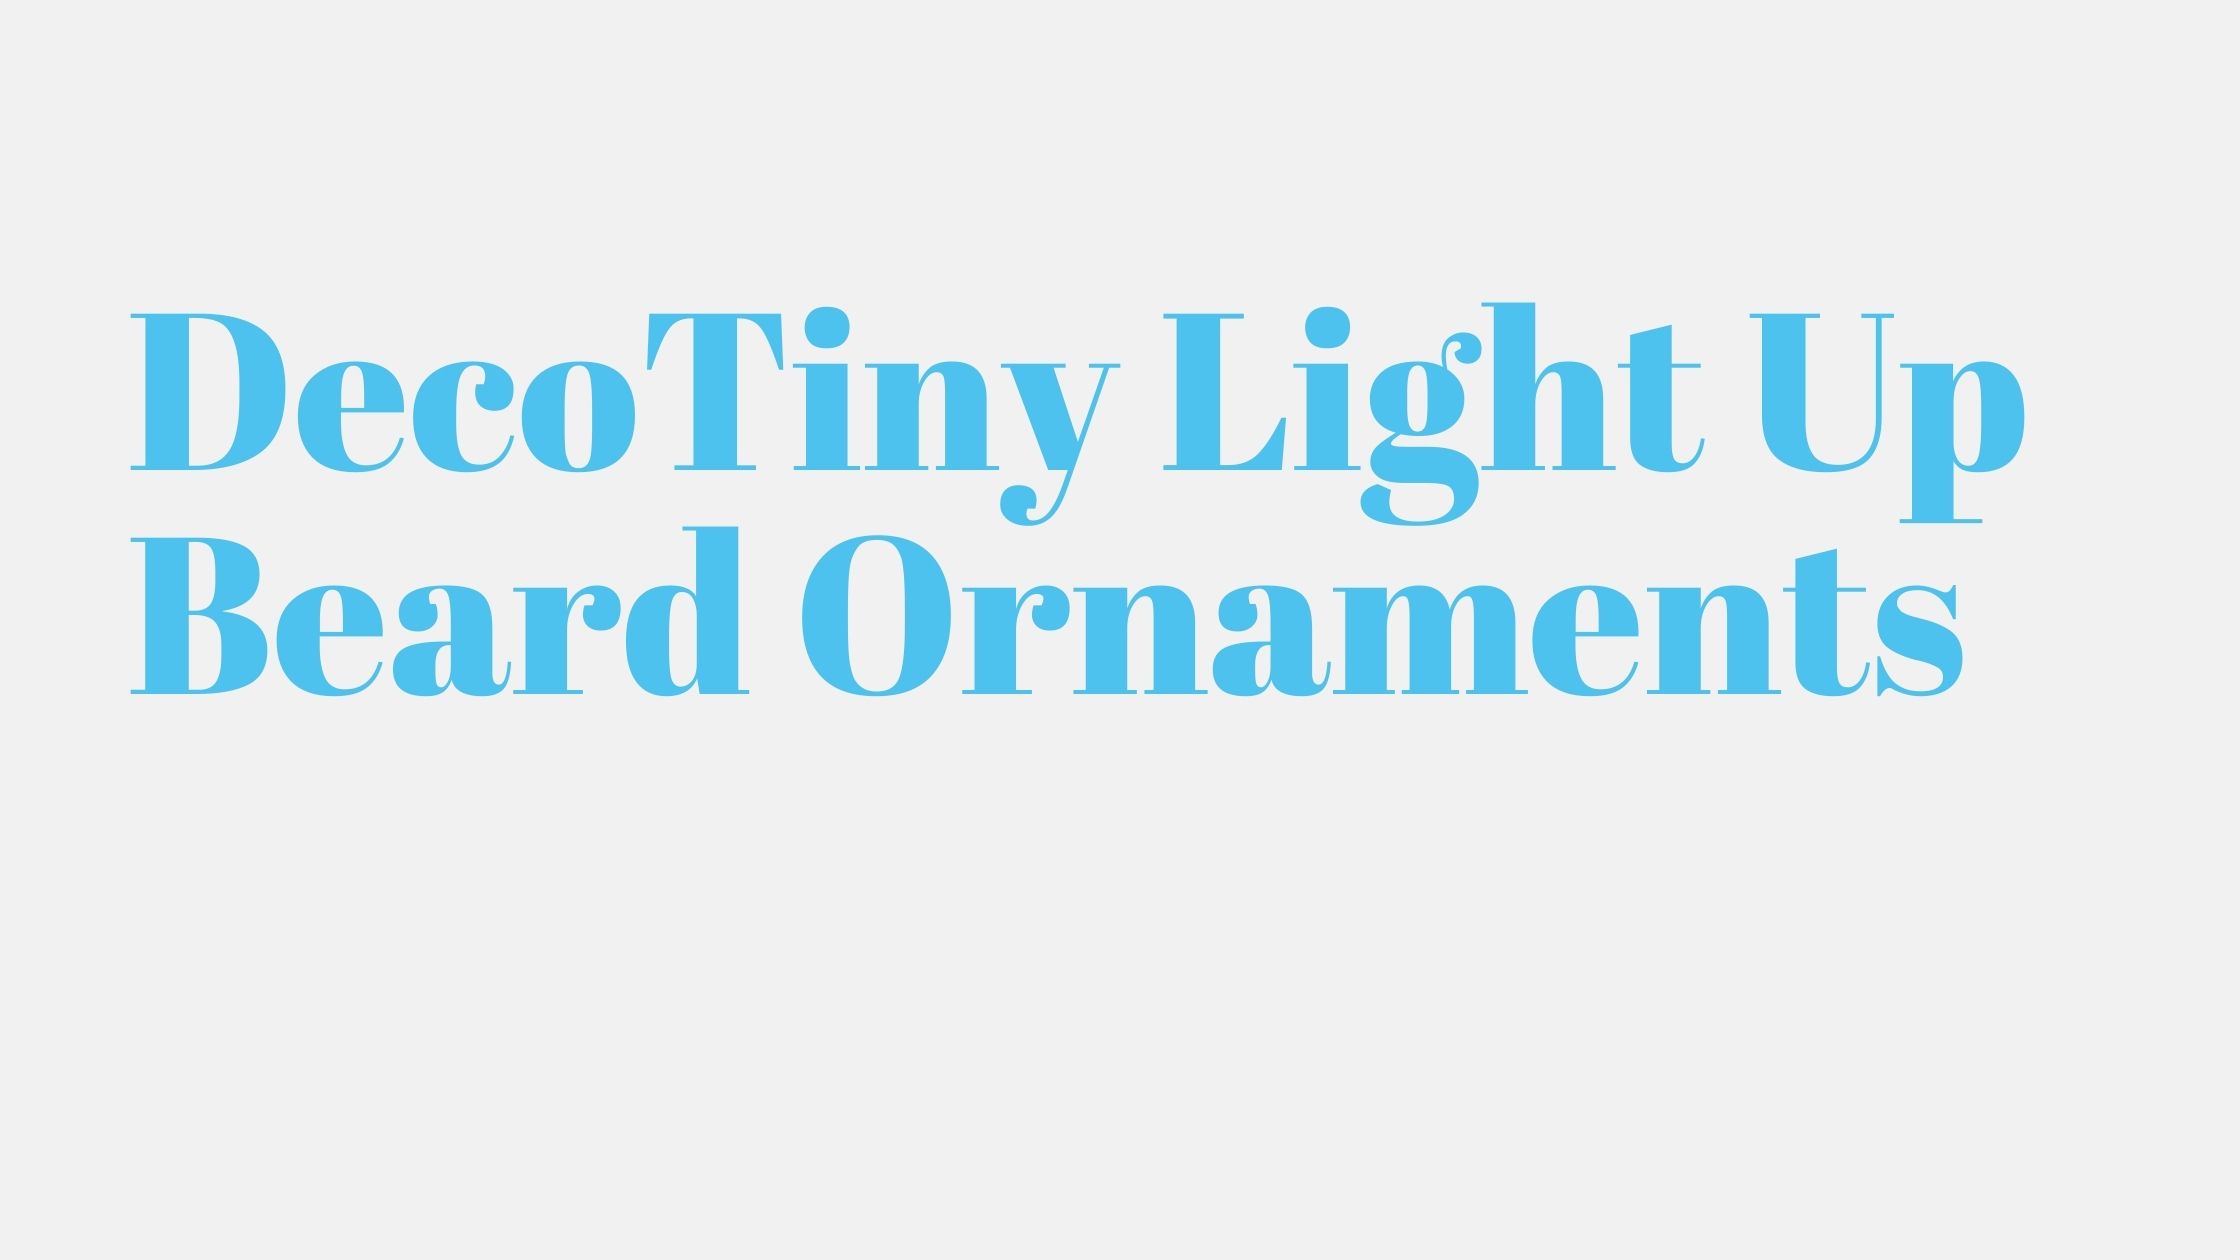 You are currently viewing DecoTiny Light Up Beard Ornaments